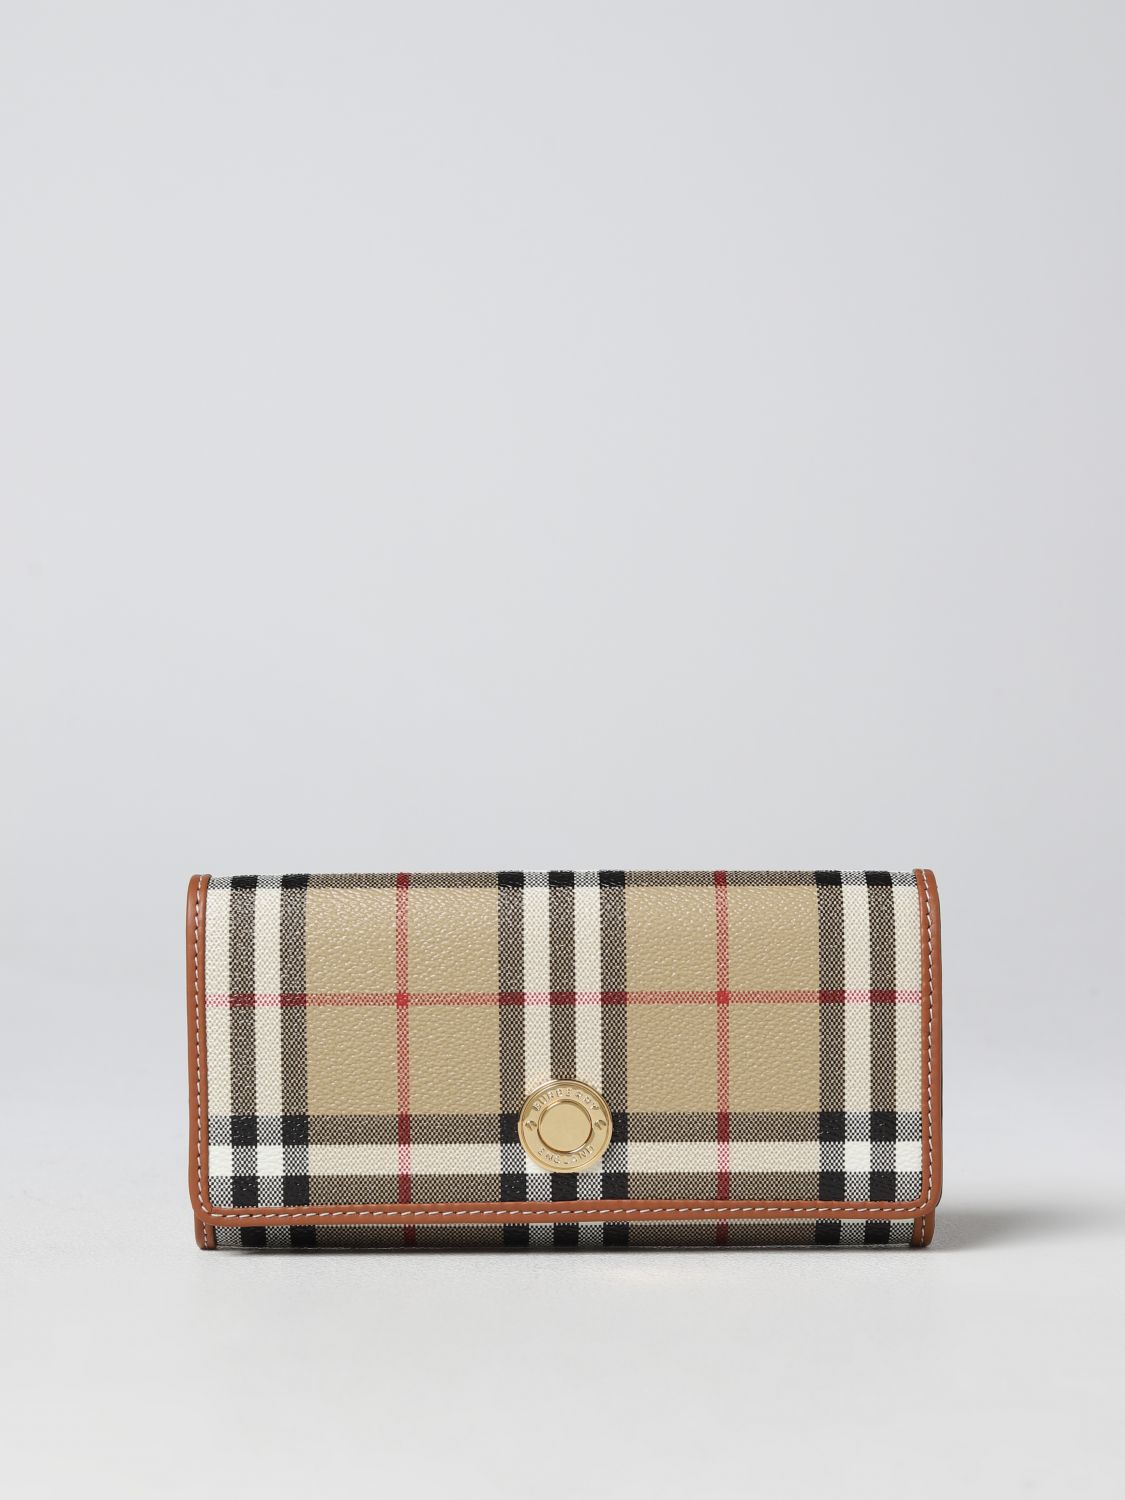 Burberry Check Leather Continental Wallet - Brown